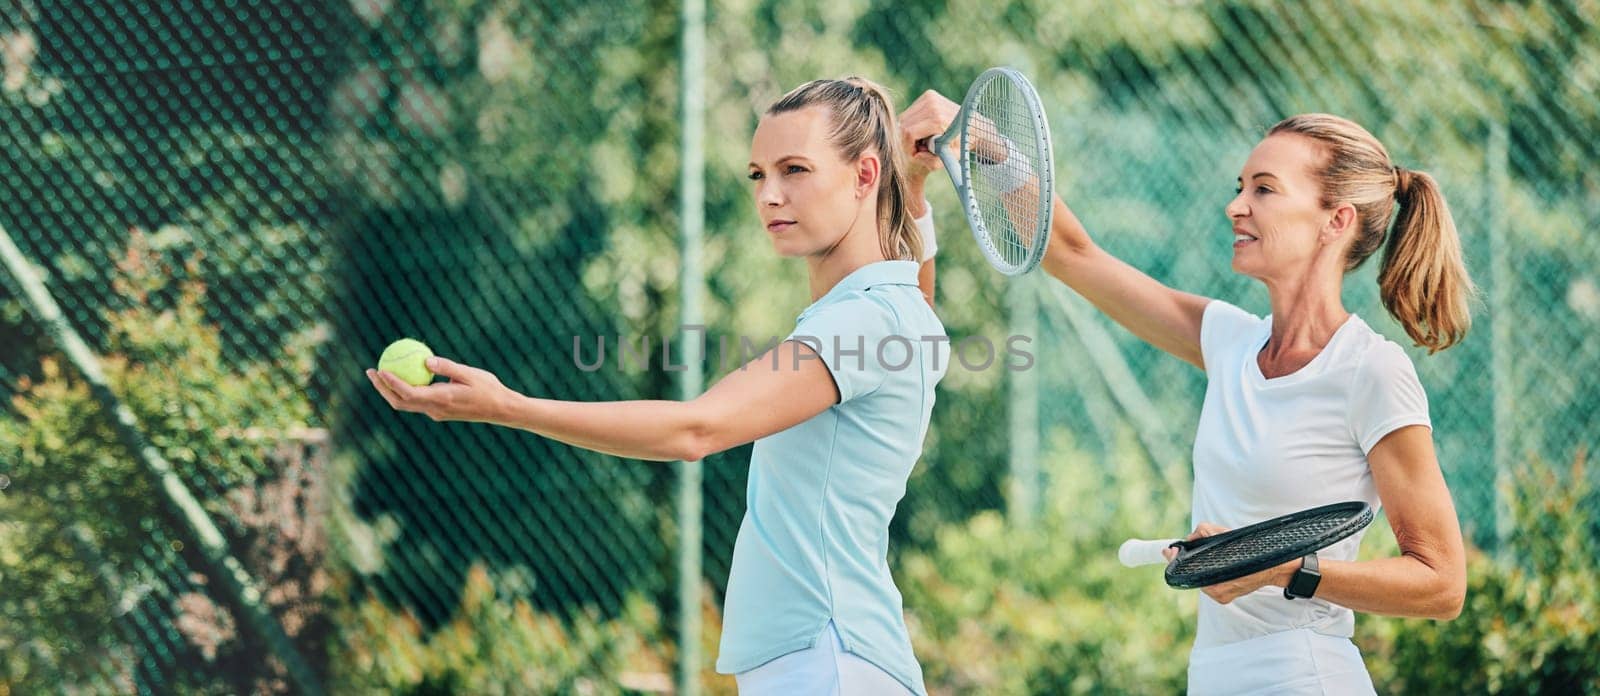 Tennis training, sport and women together on outdoor turf, instructor or coach with fitness, motivation and help. Exercise, sports lesson and athlete workout, teaching and learning skill on court.